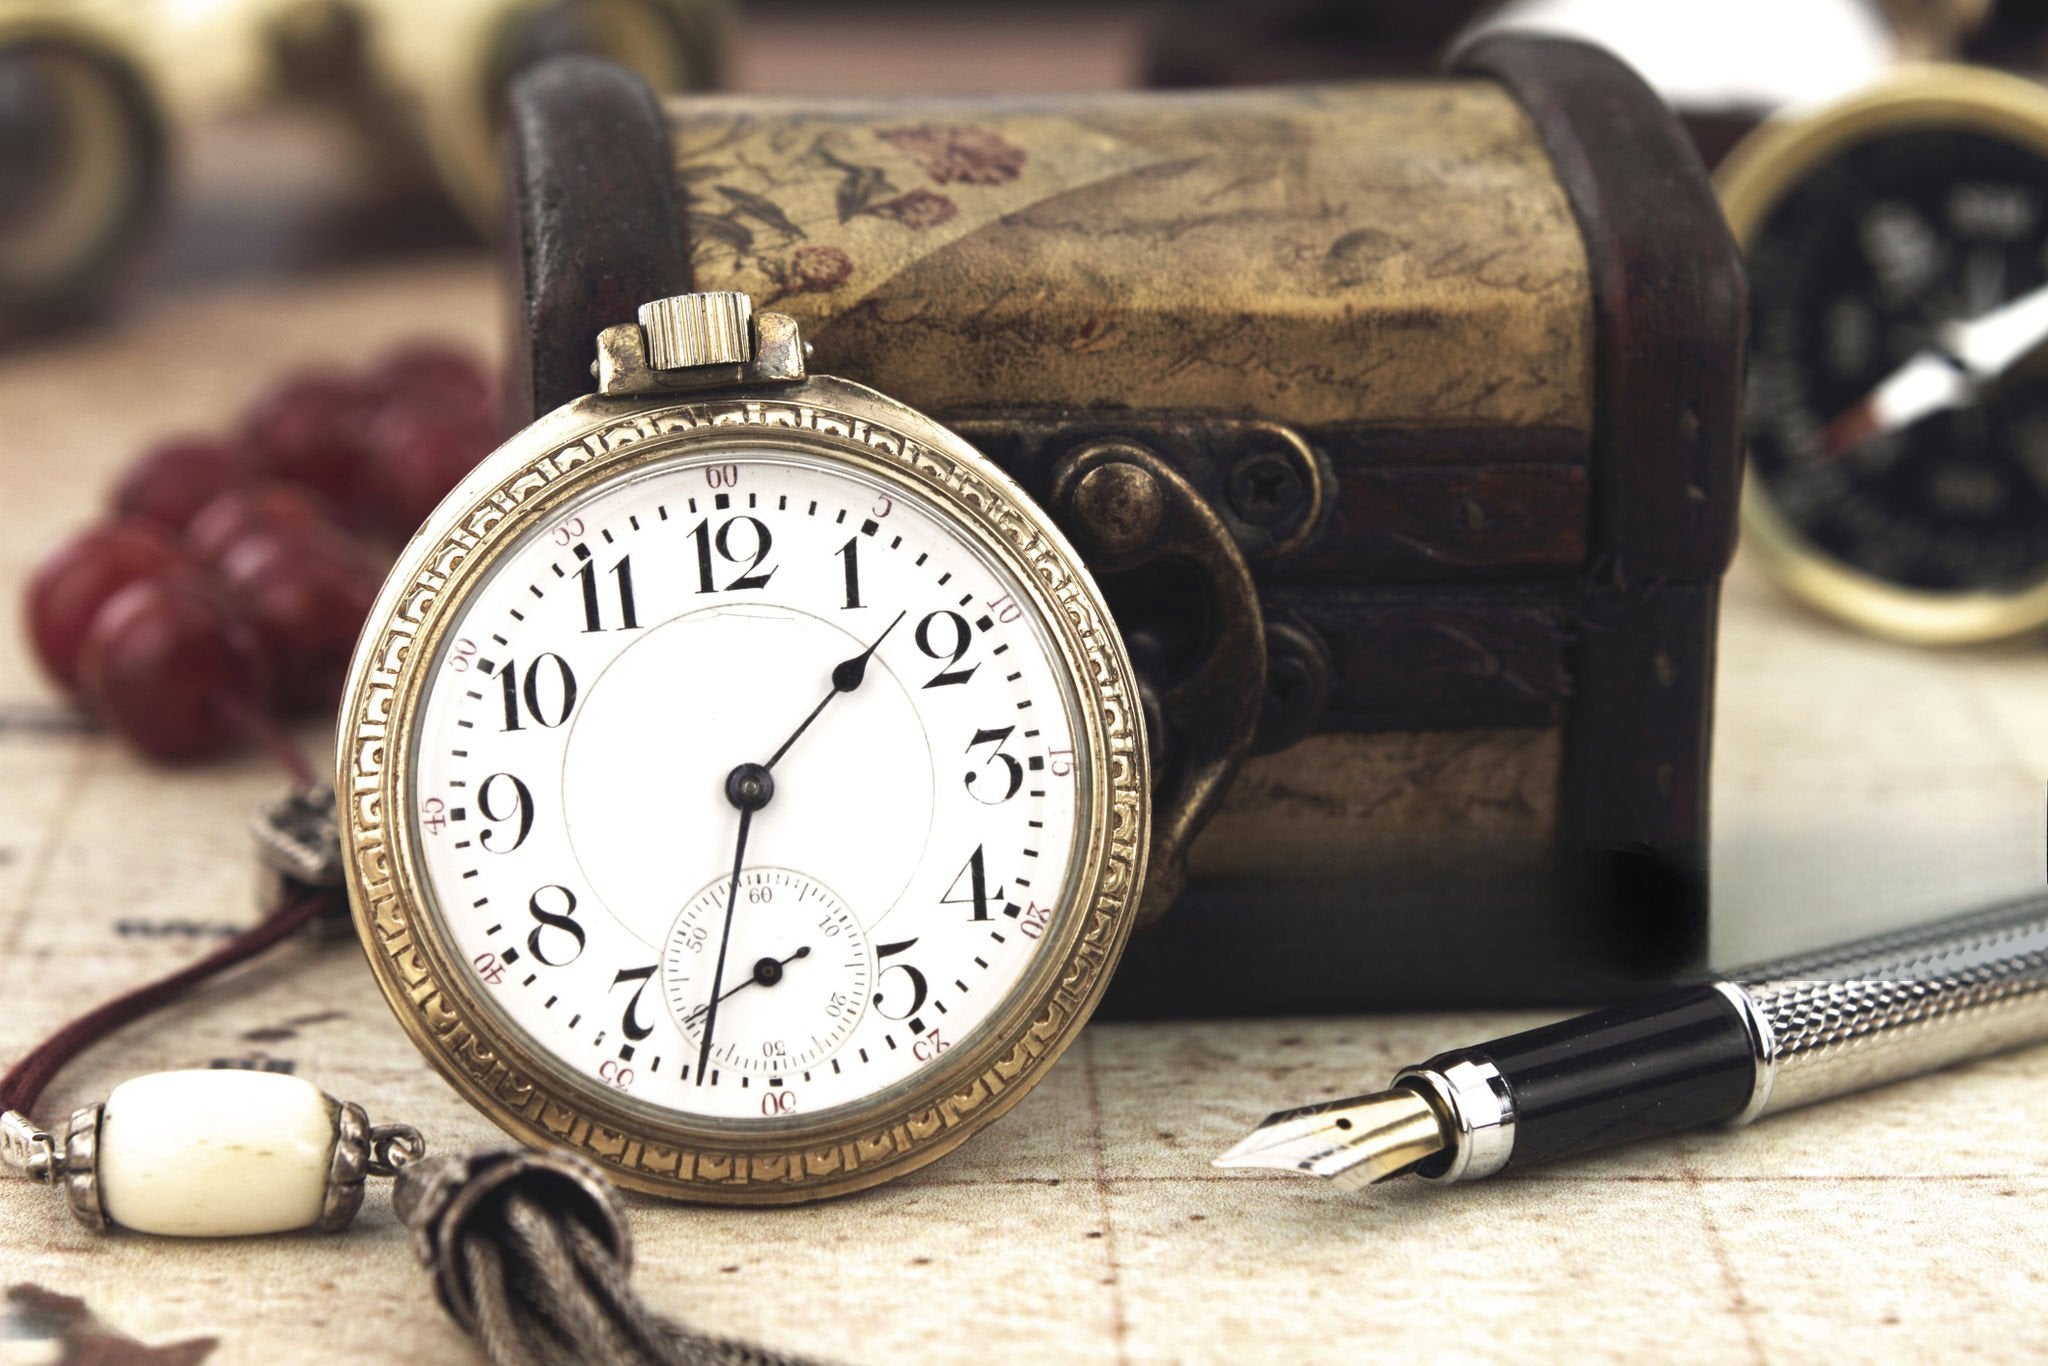 Pocket watch leaning against a box with a pen in the foreground